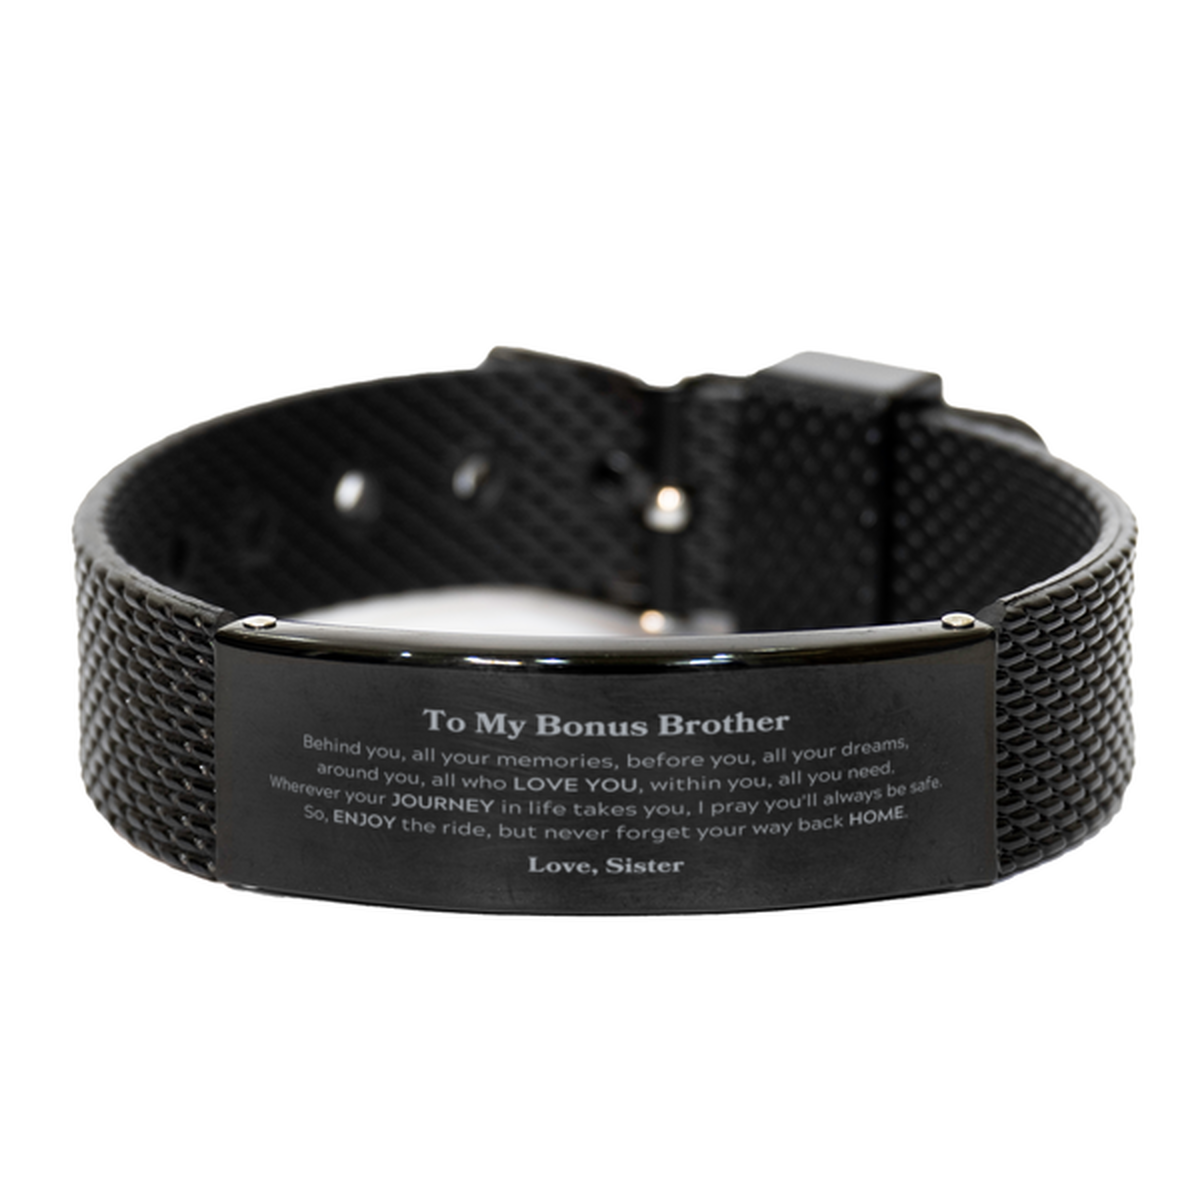 To My Bonus Brother Graduation Gifts from Sister, Bonus Brother Black Shark Mesh Bracelet Christmas Birthday Gifts for Bonus Brother Behind you, all your memories, before you, all your dreams. Love, Sister